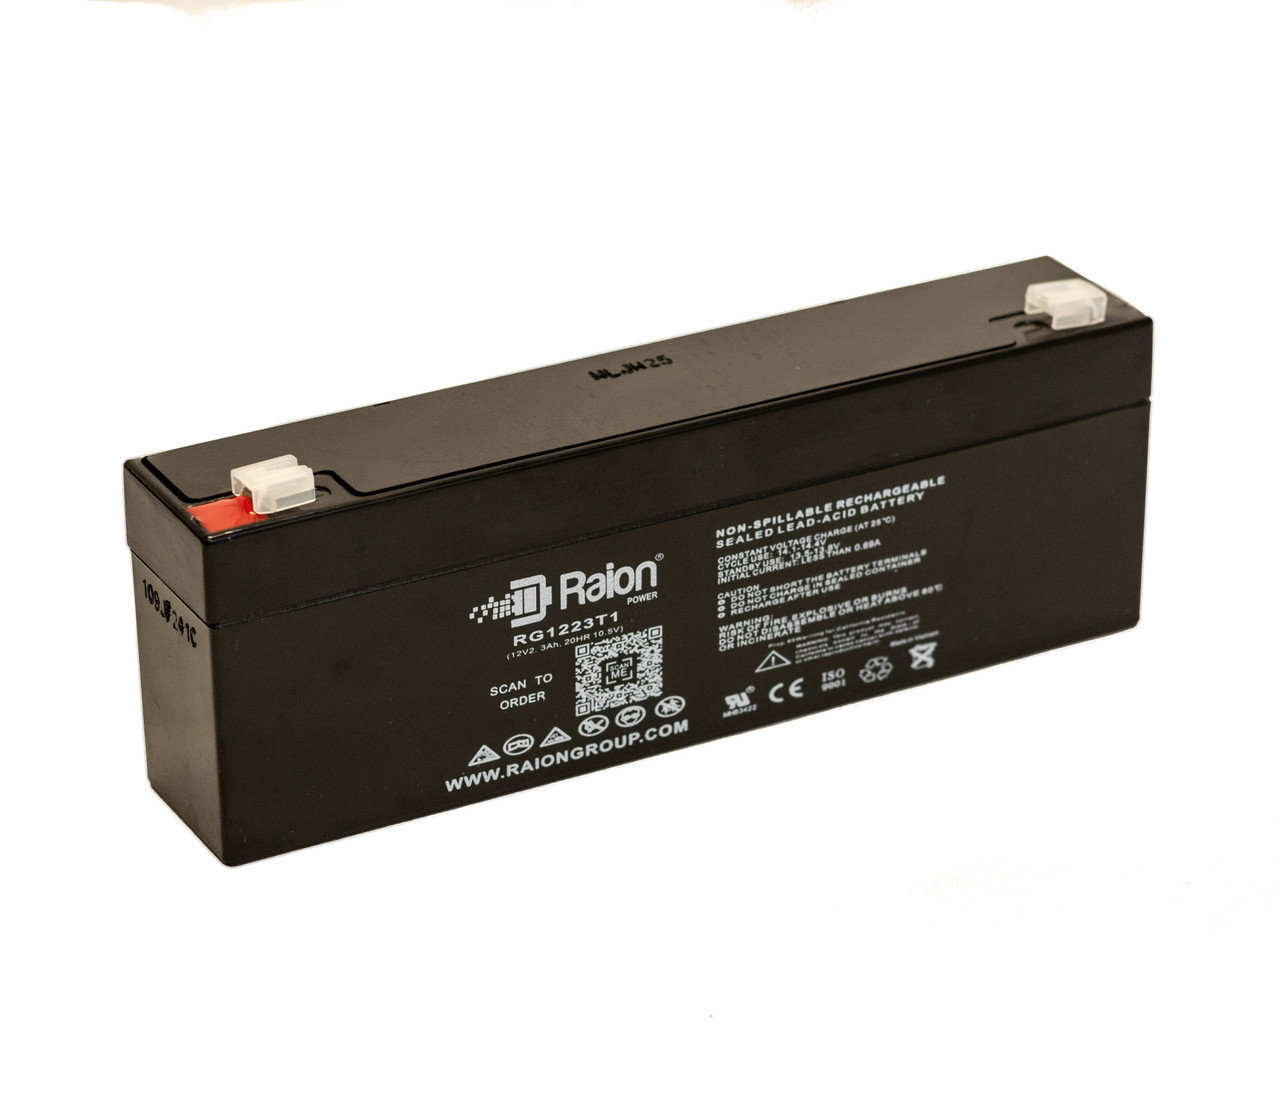 Raion Power RG1223T1 Replacement Battery for Criticare Systems 507E VSM